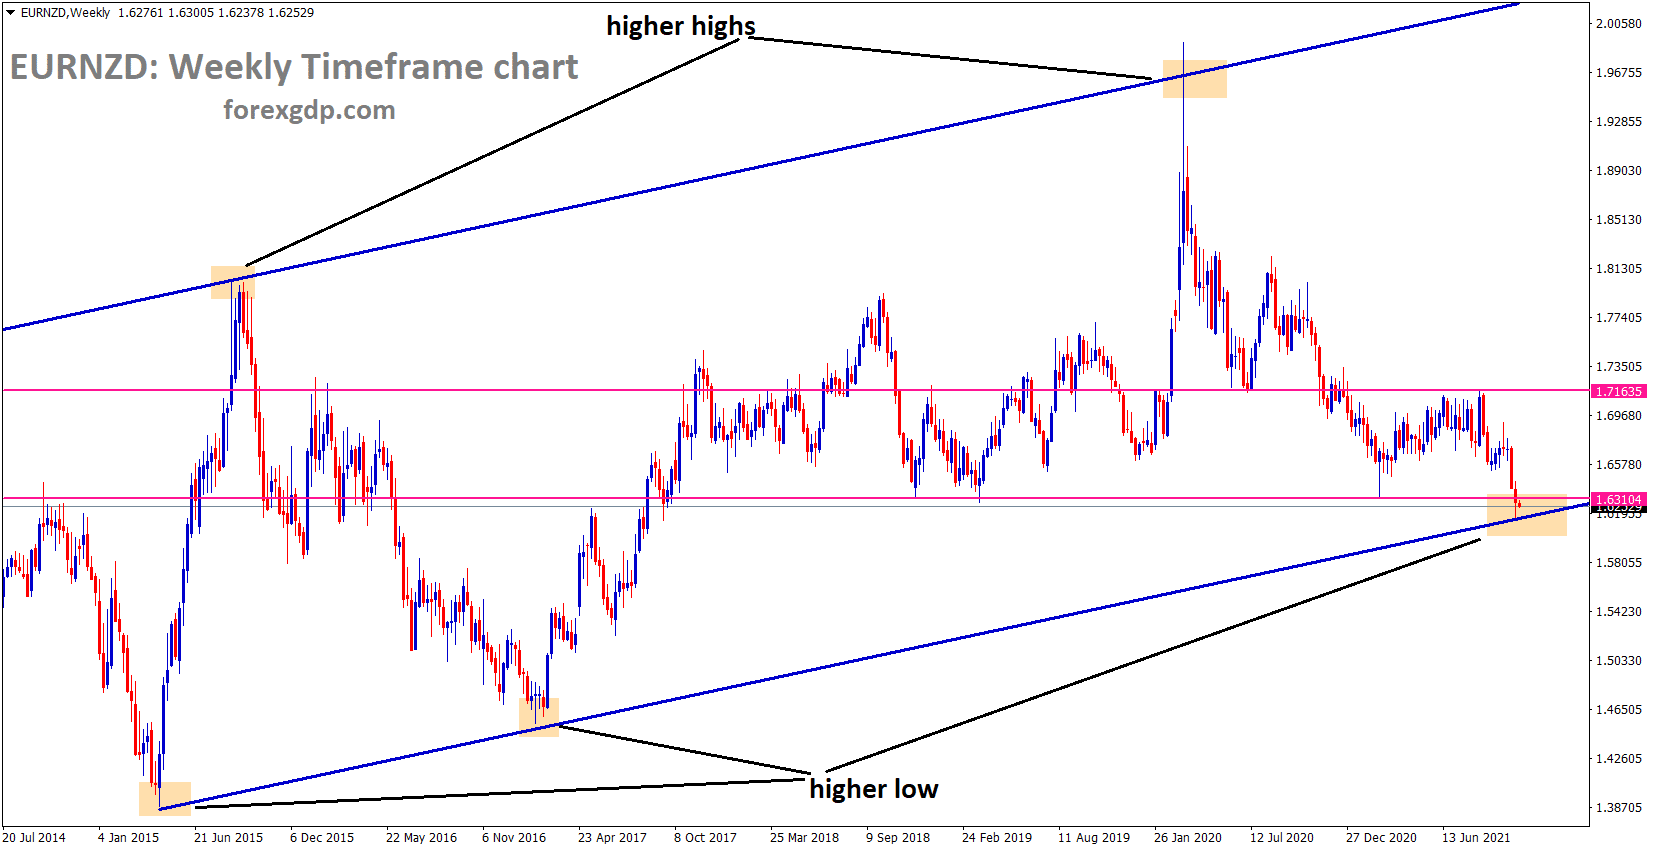 EURNZD is moving in an ascending channel and higher low progressing